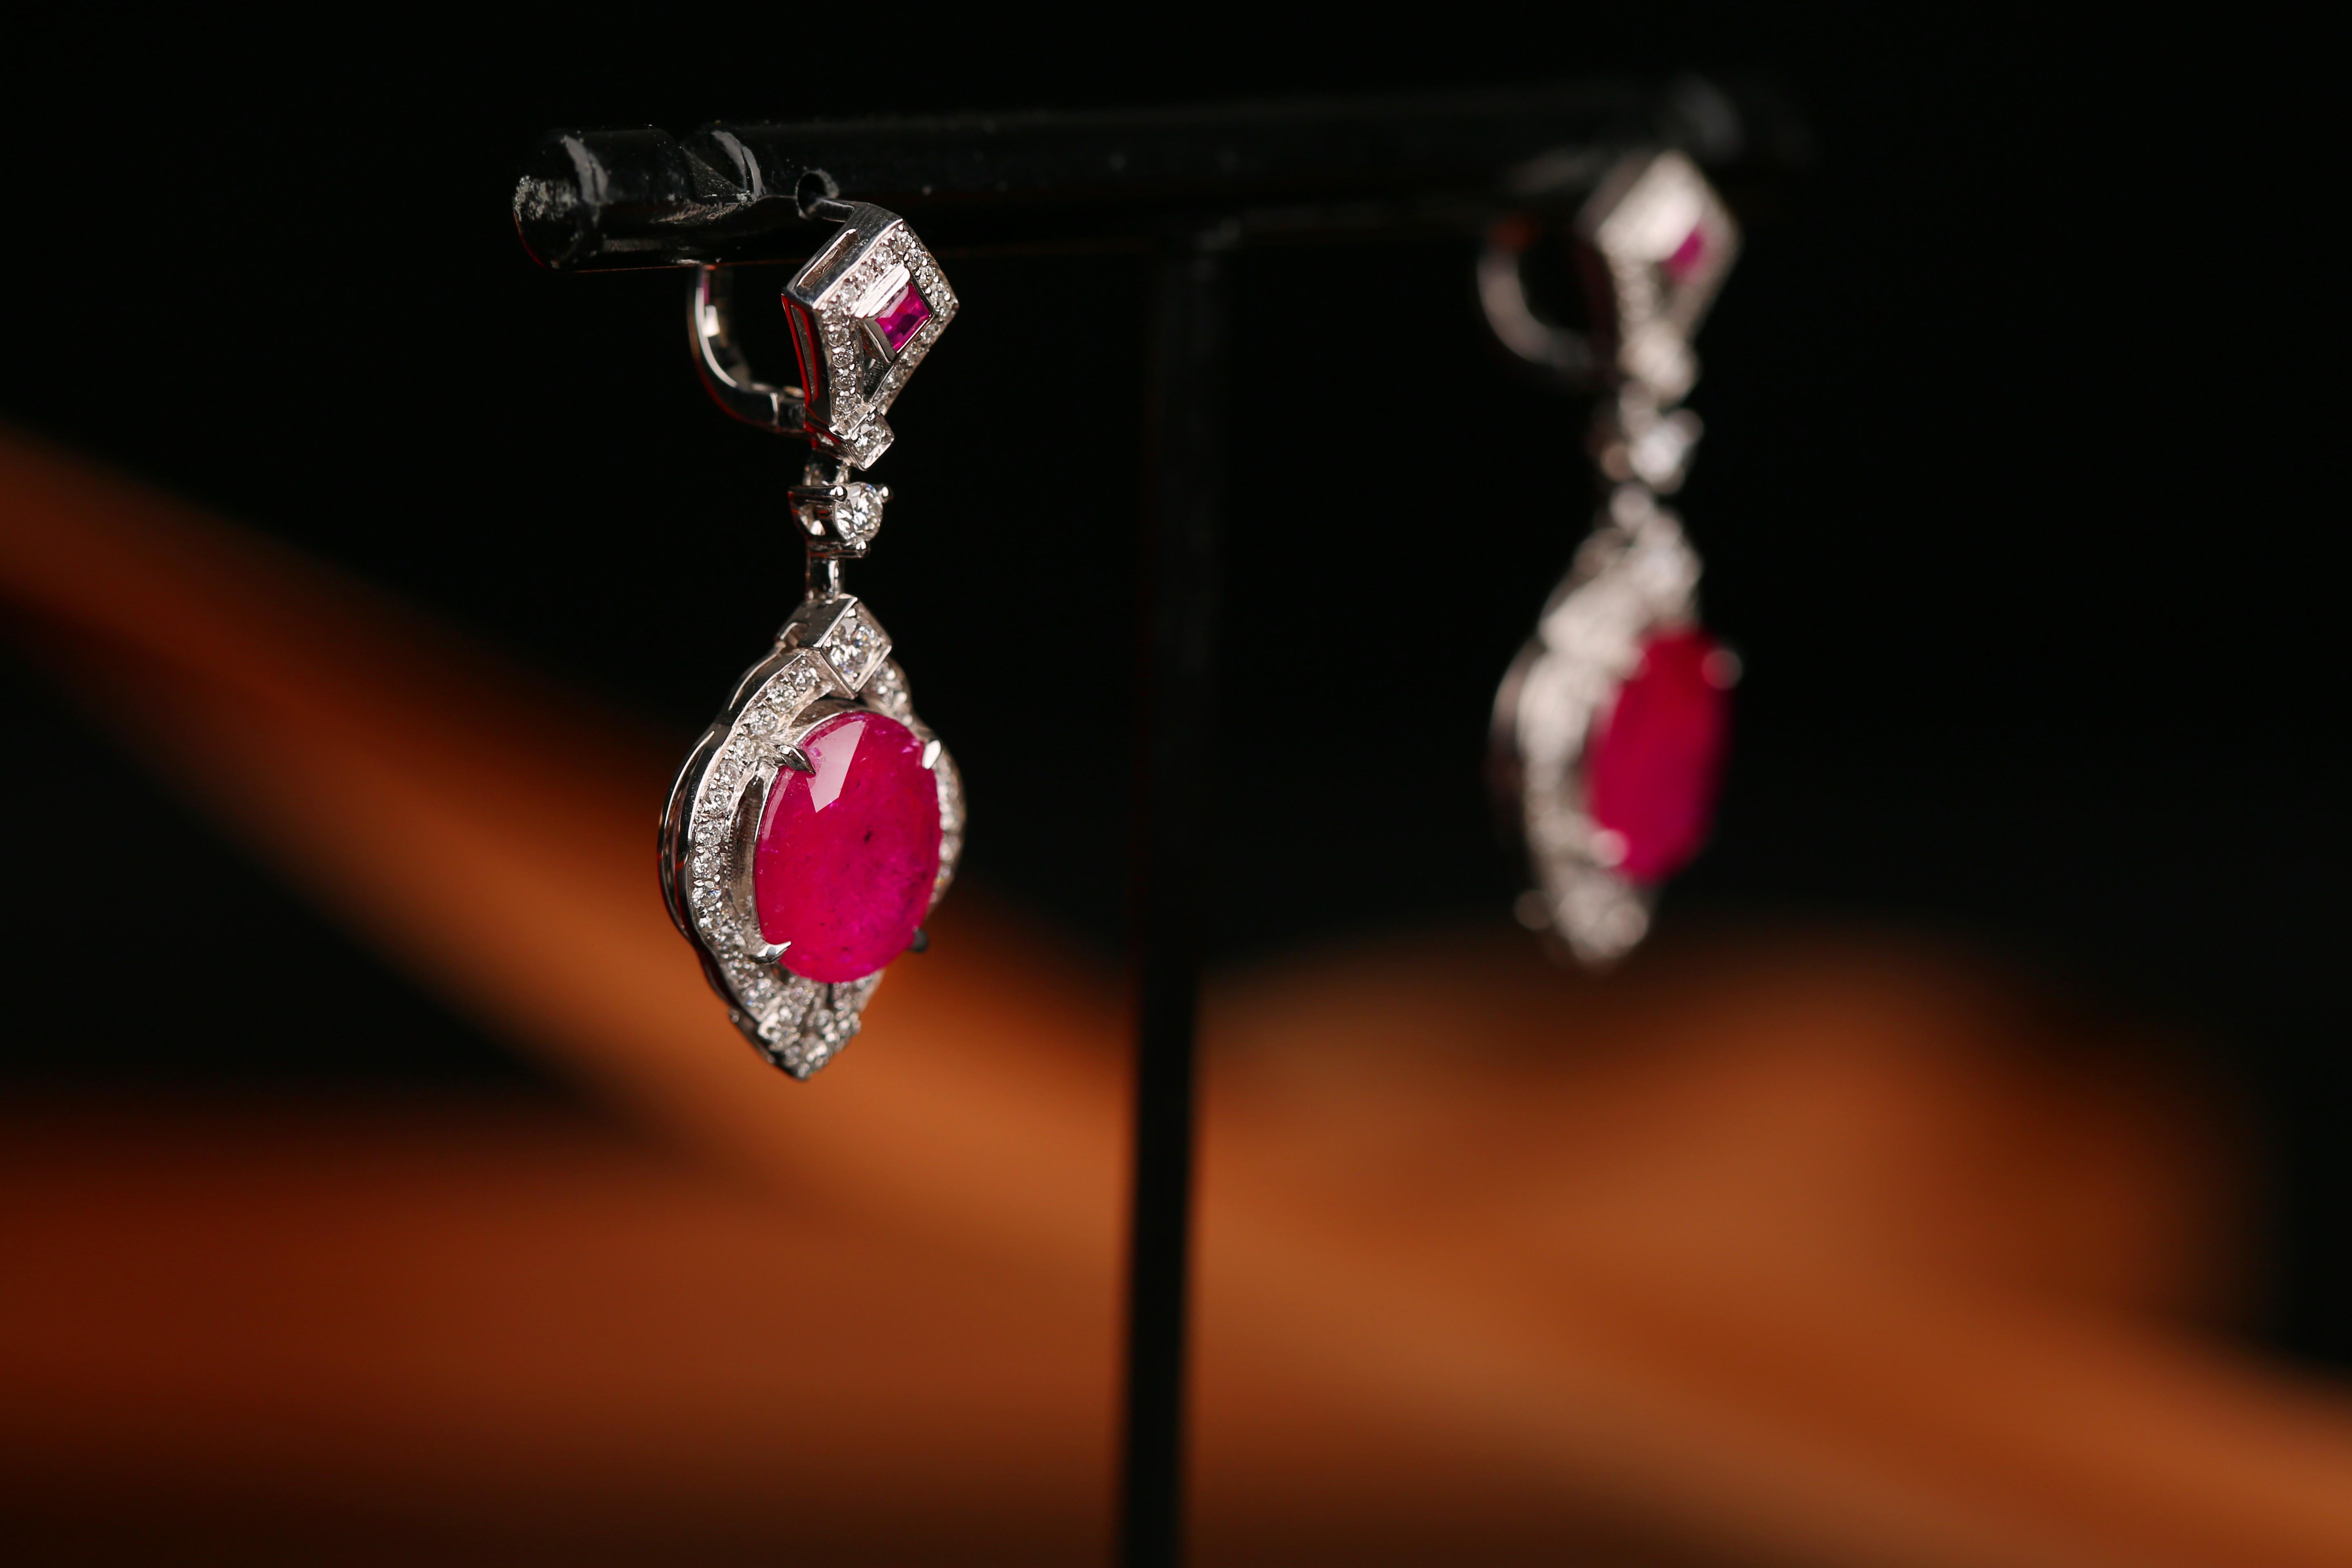 A Pair of unheated Ruby and Diamond ArtDeco 18k White Gold Earring. This pair consists of 4 Rubies, 2 smaller square rubies and 2 larger oval shape rubies. It is of ArtDeco design with kite like Geometric design on top and diamond clustered rubies